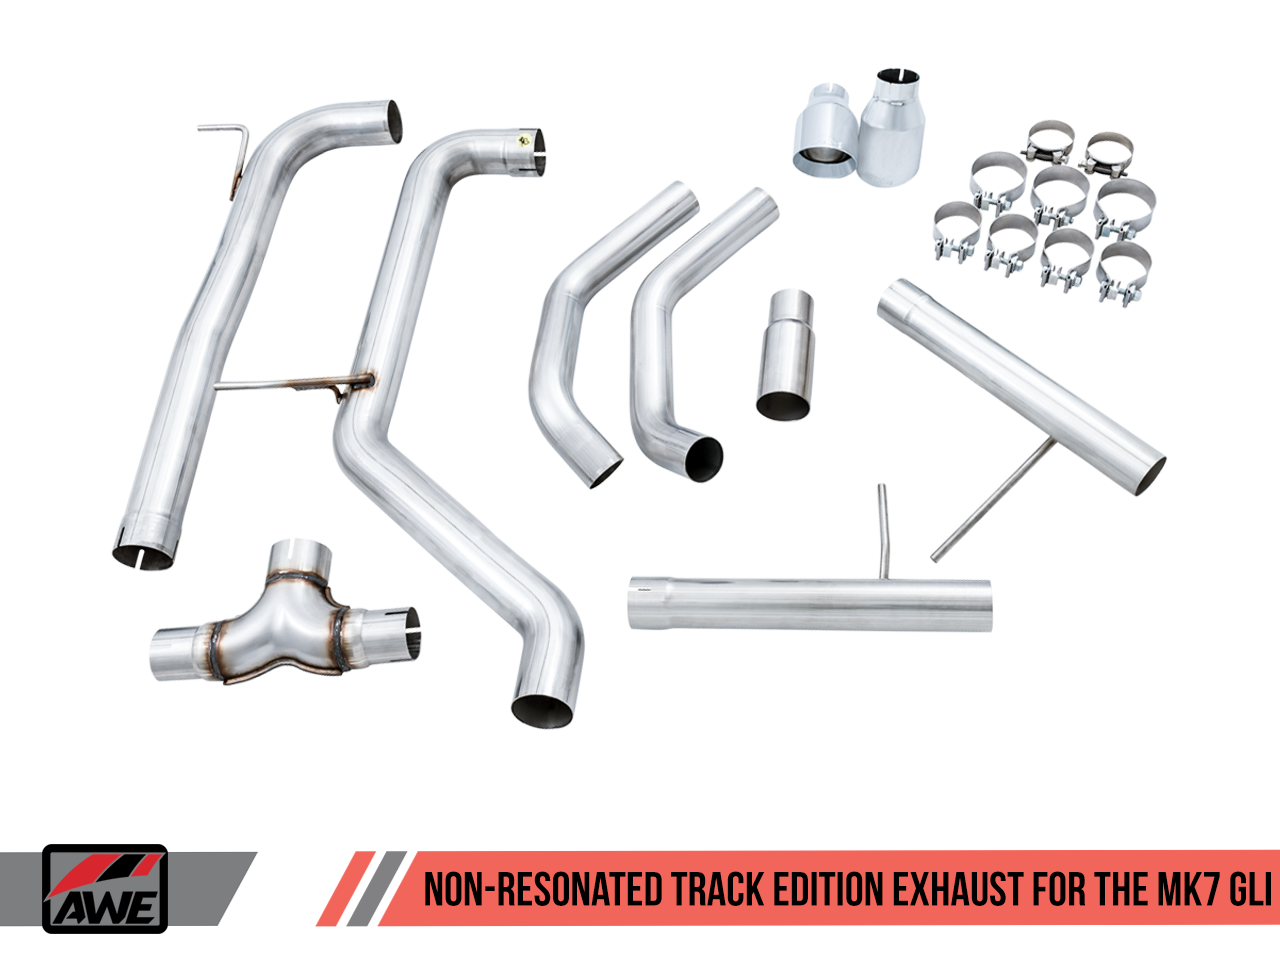 AWE Track Edition Exhaust - Resonated - for MK7 Jetta GLI w/ High Flow Downpipe (not included) - Motorsports LA